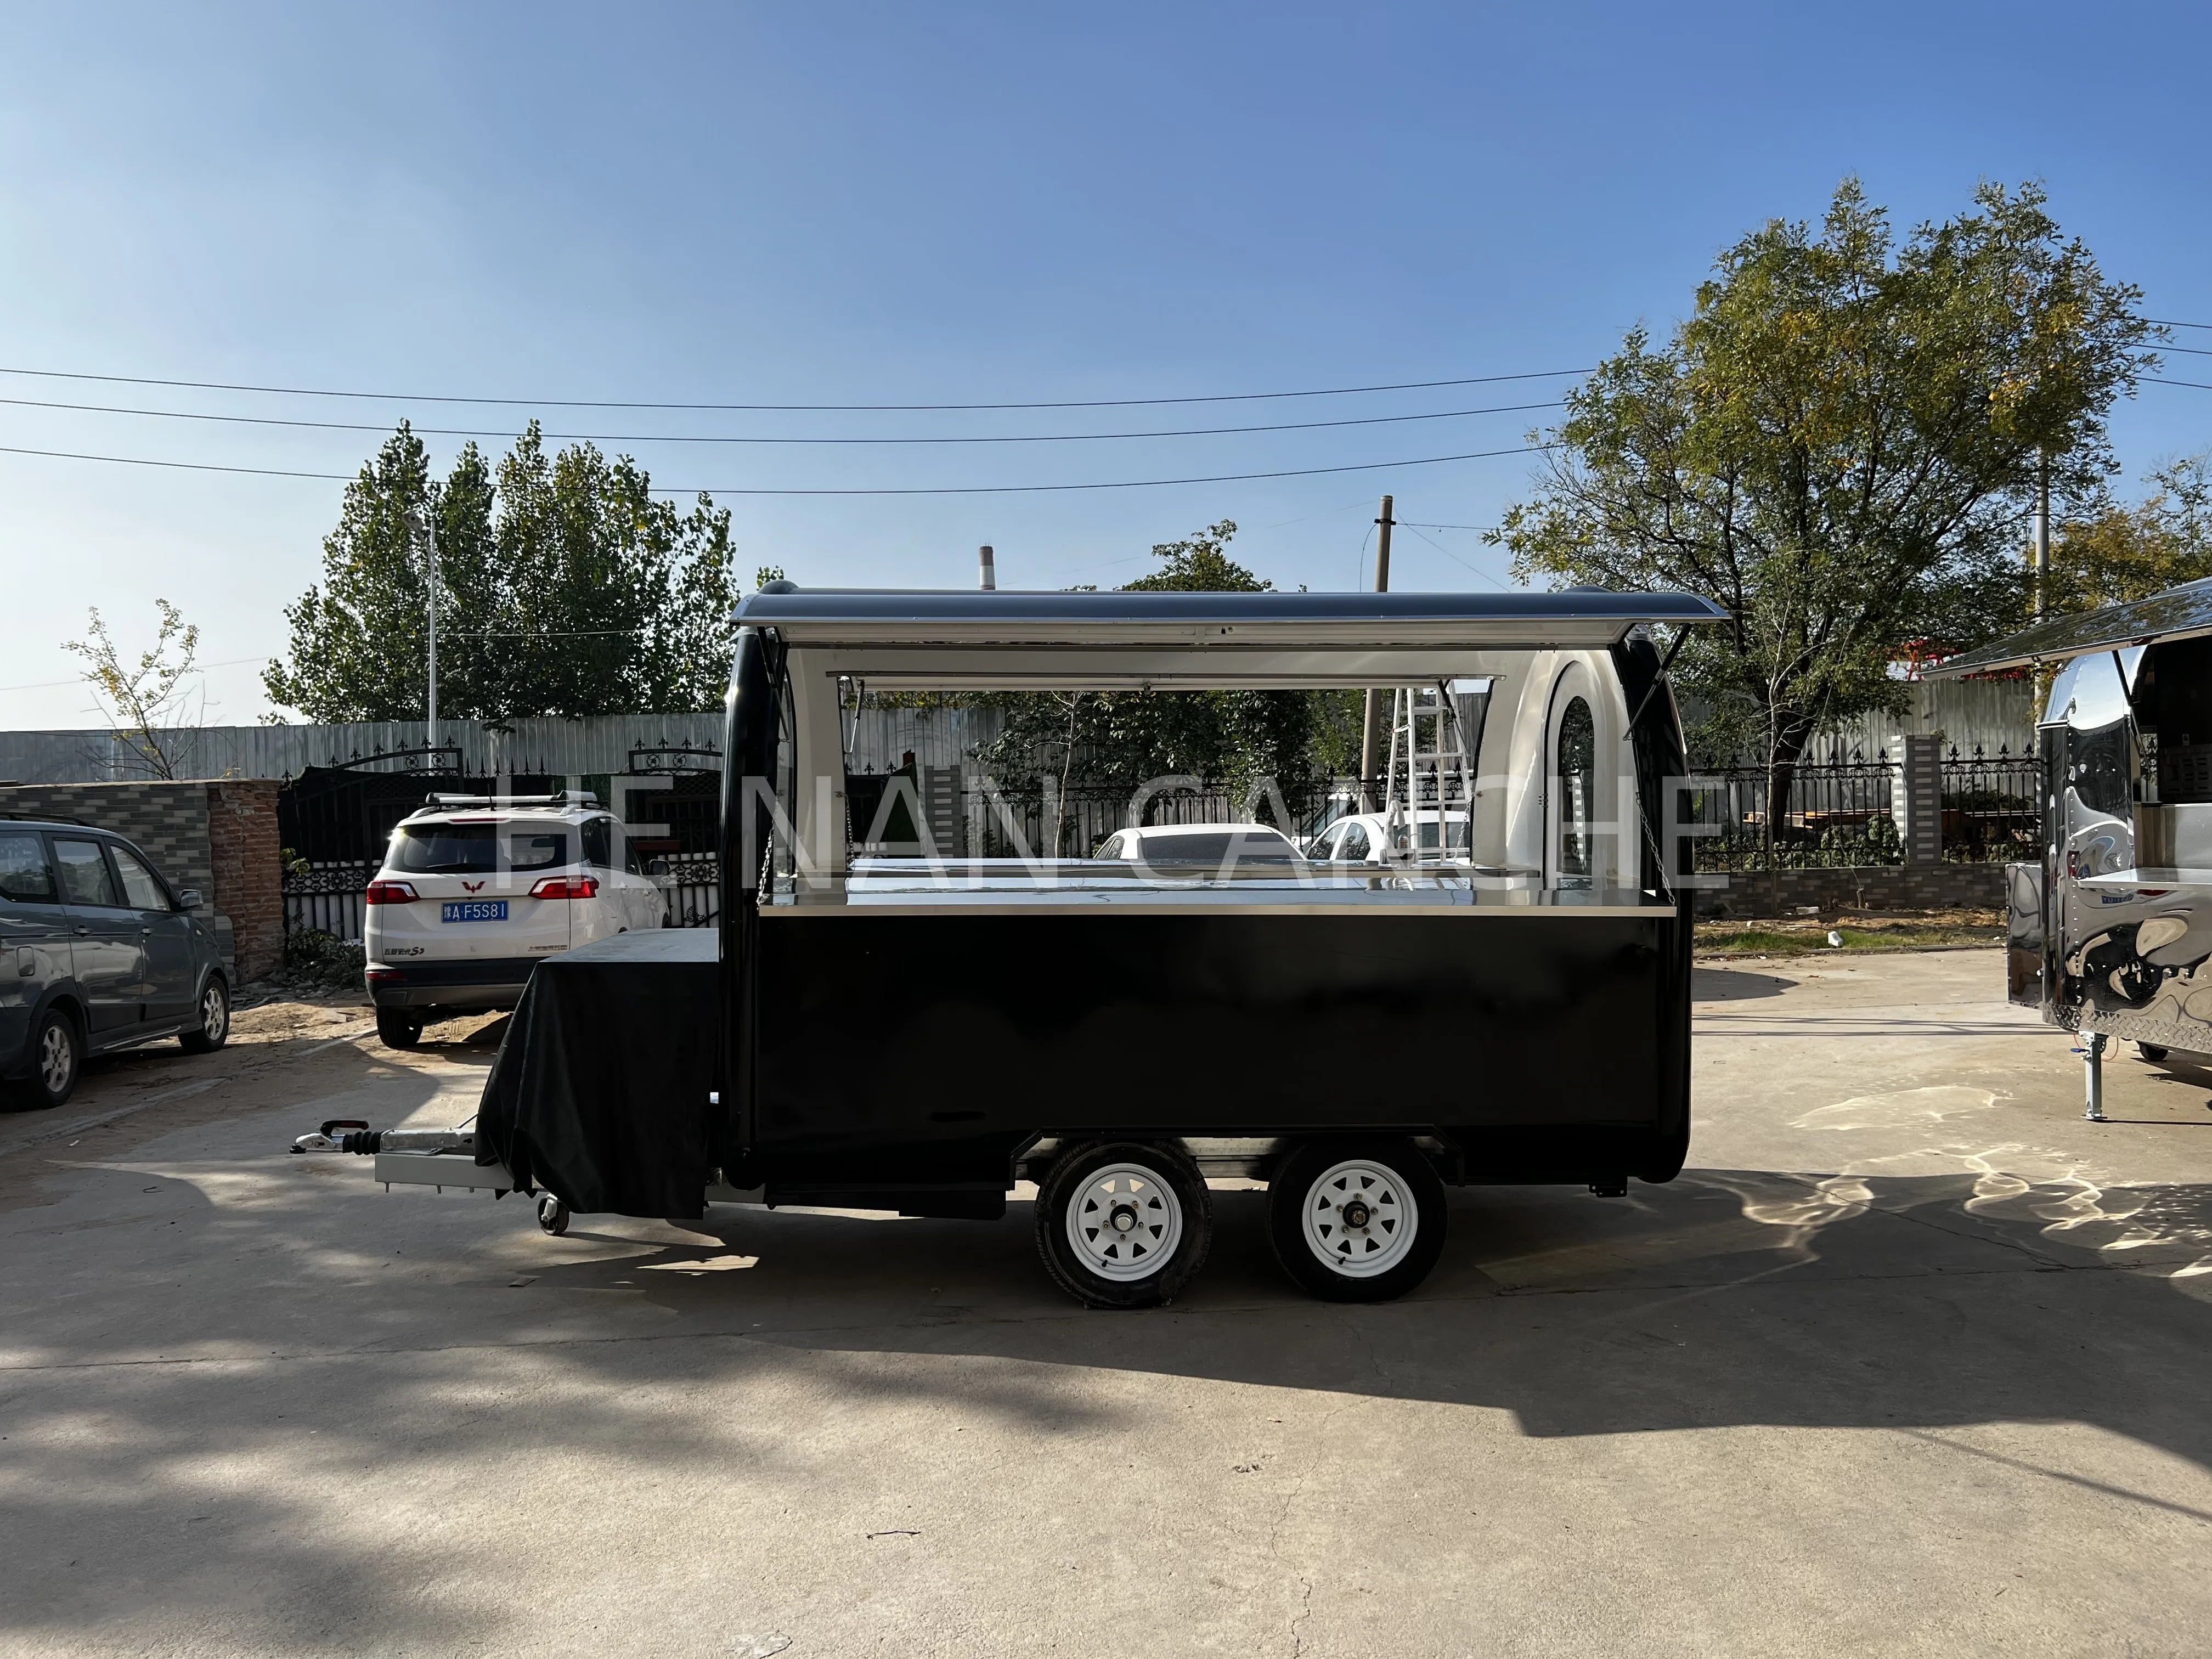 ISO approved American standard street food trailers with 3 sinks, ice cream mobile stalls & hot dog cart an extraordinary exhibition of seeing with the fingertips all and deck magic tricks finger close up street stage magic trick